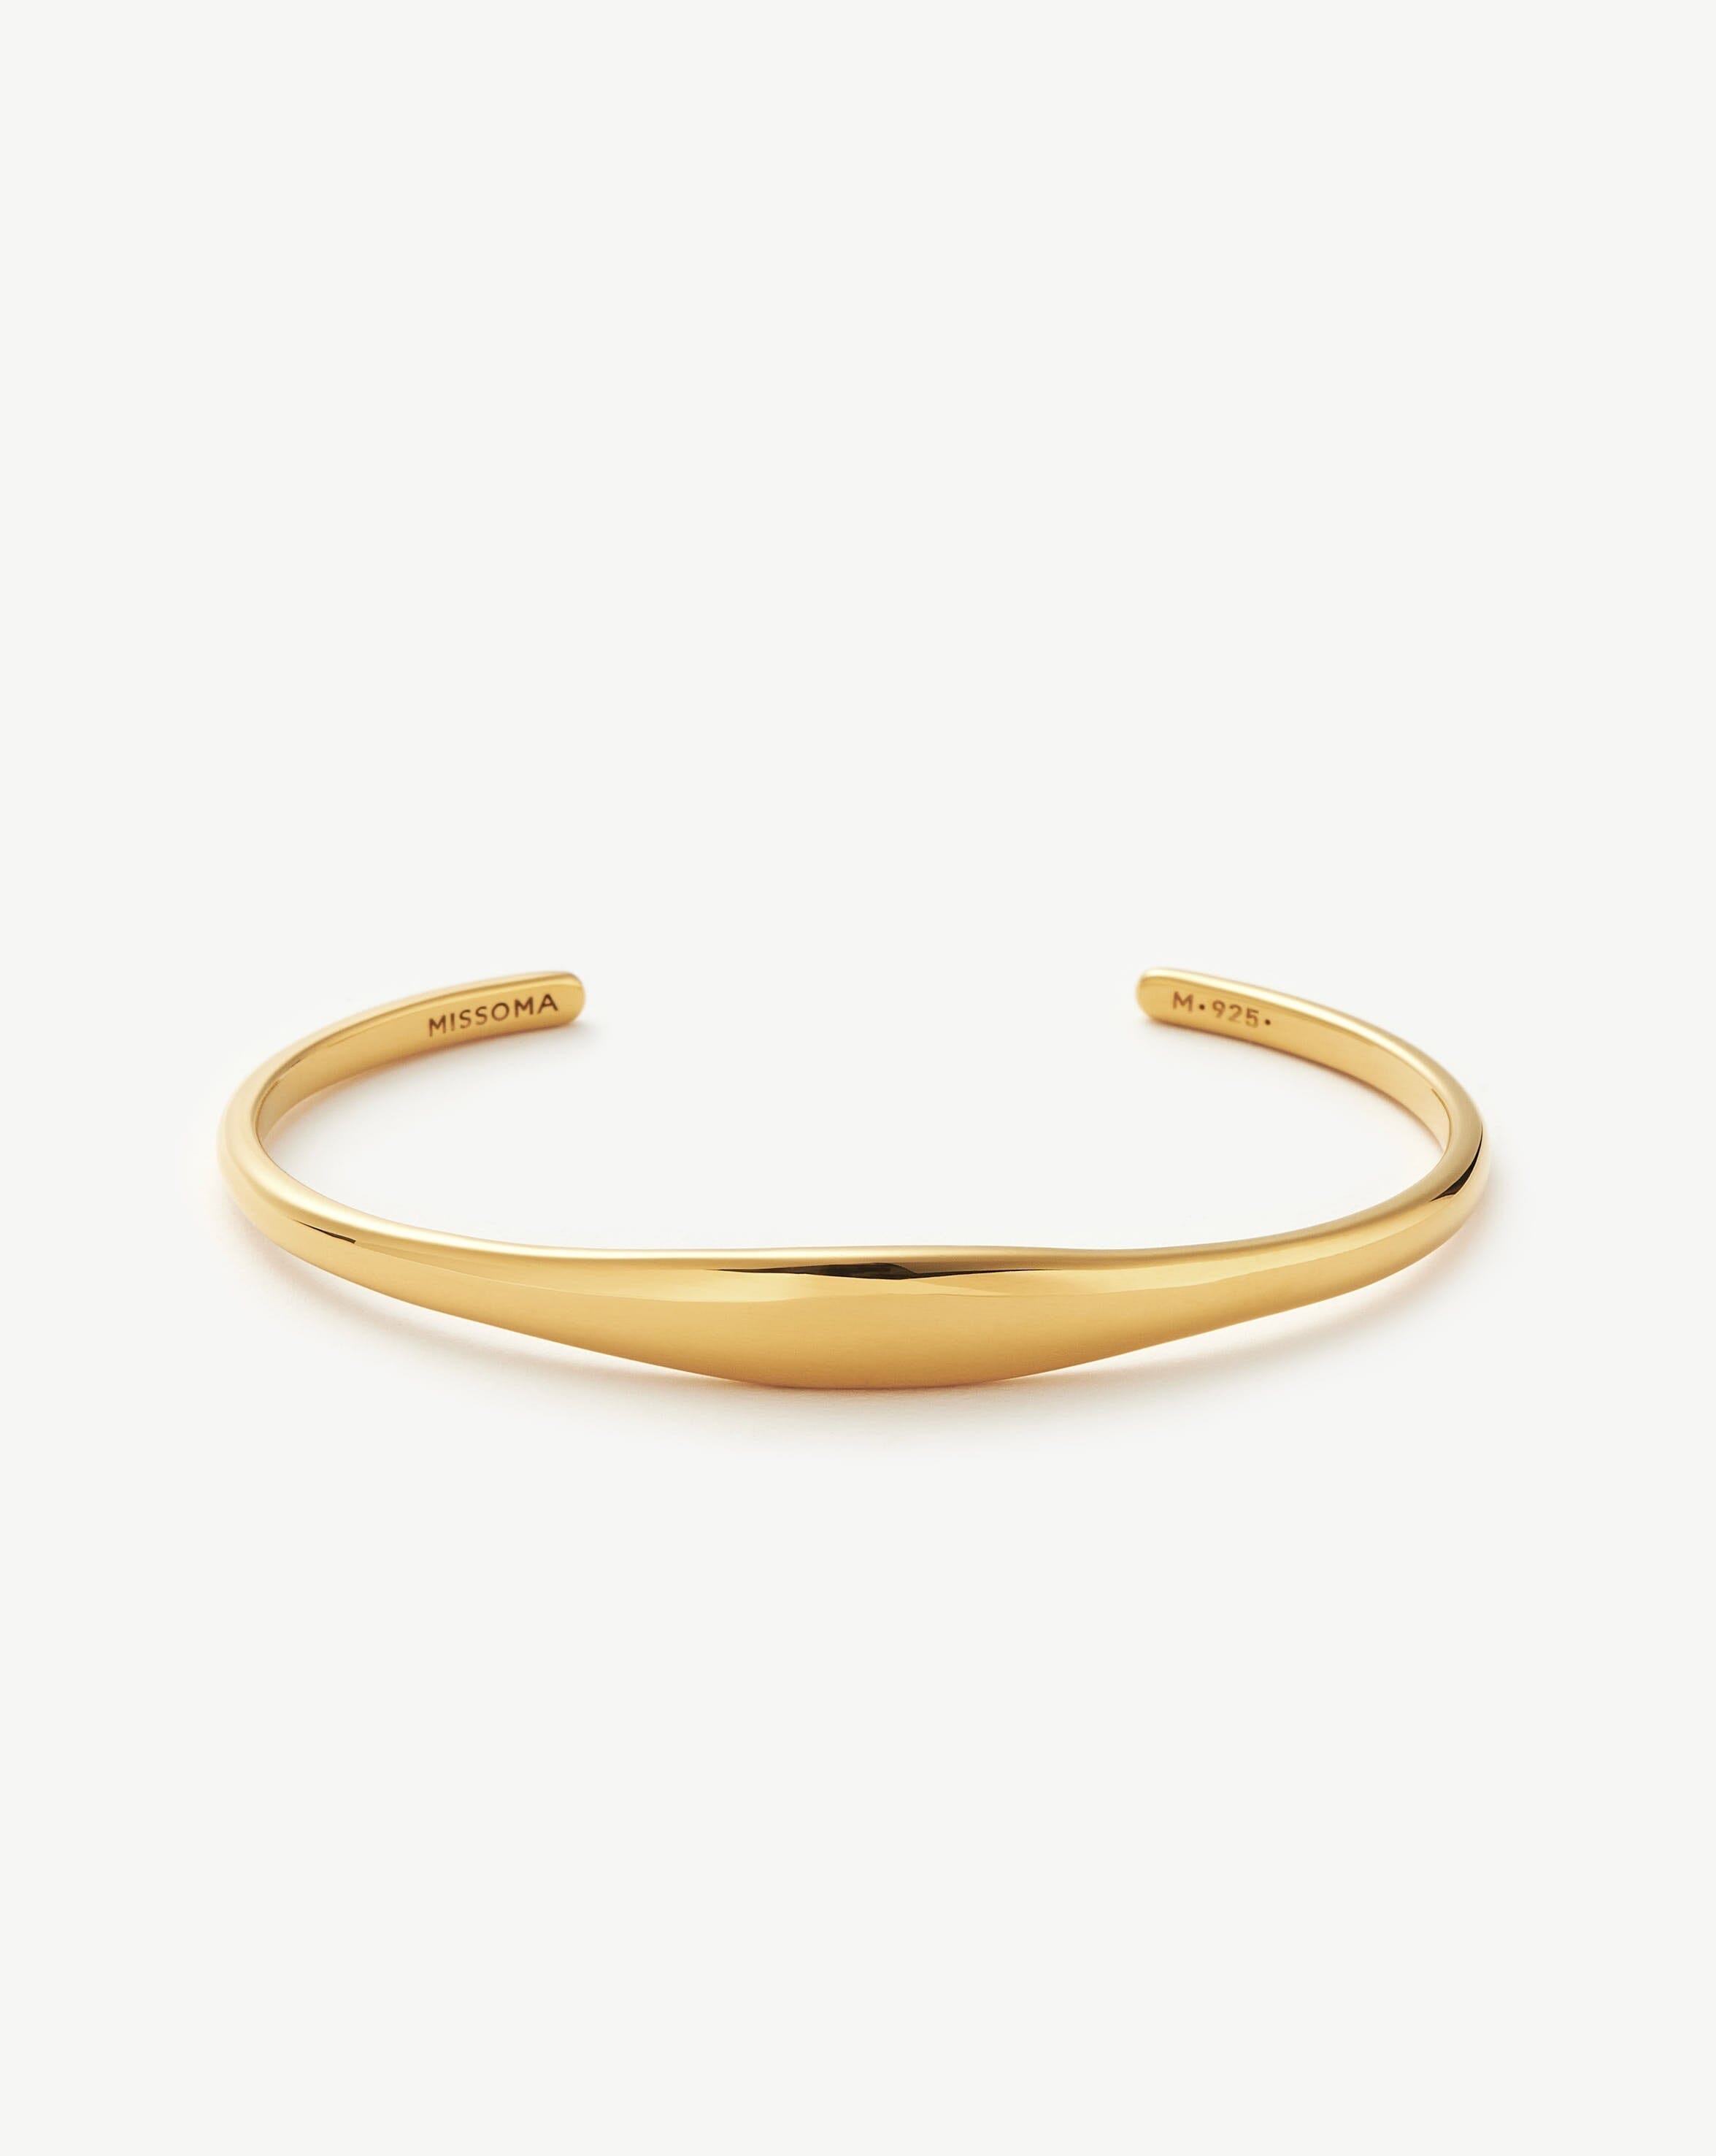 Engravable Cuff Bracelet | 18ct Gold Plated Vermeil Bracelets Missoma 18ct Gold Plated Vermeil 